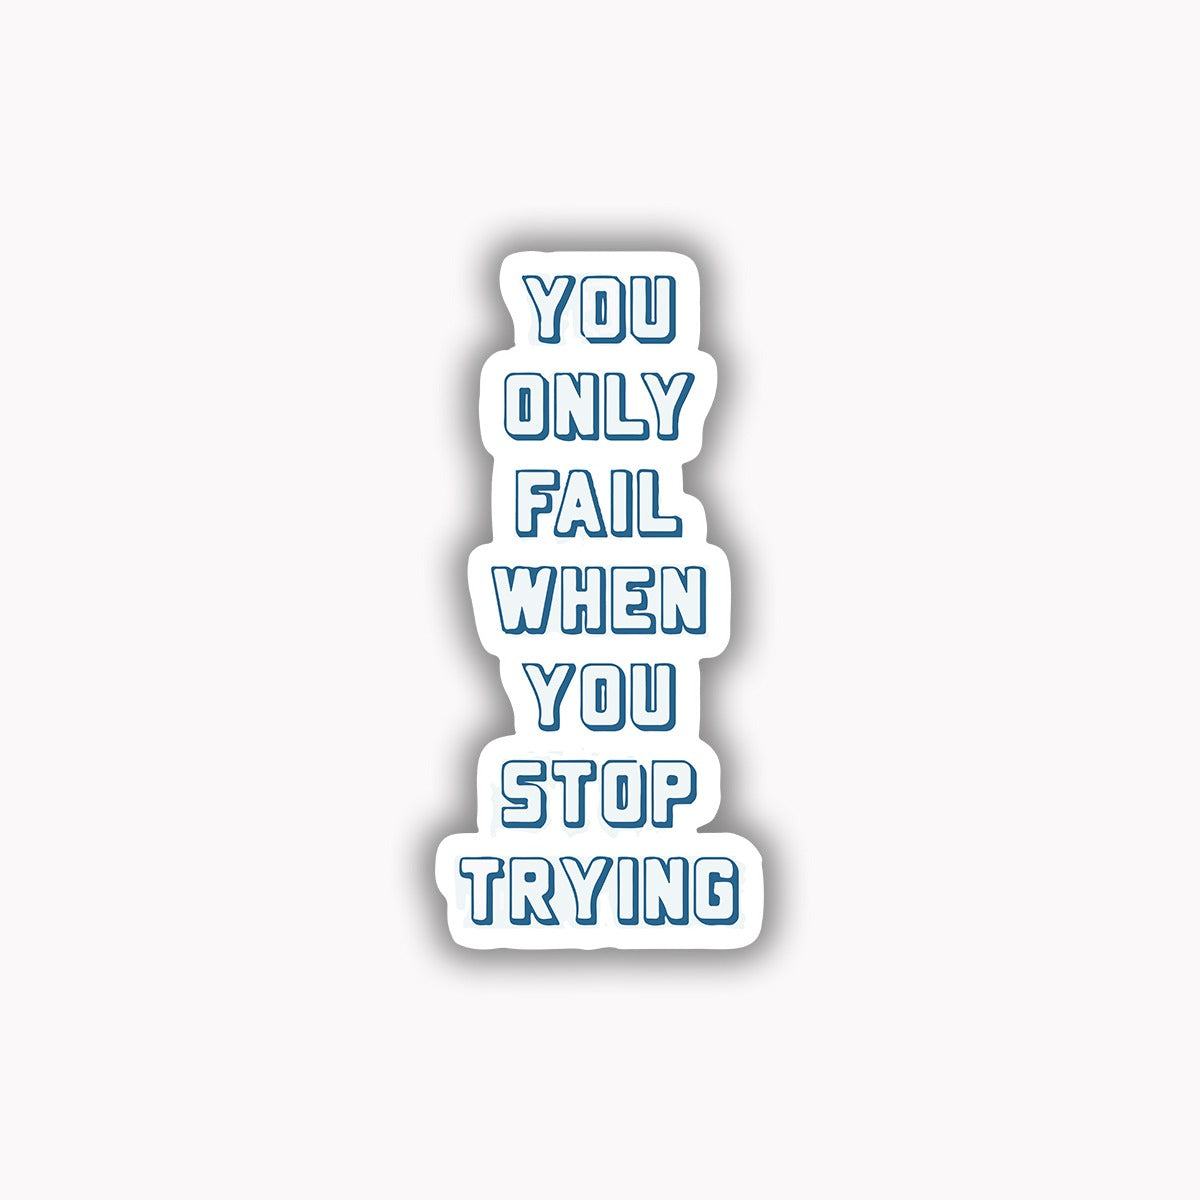 You only fail when you stop trying